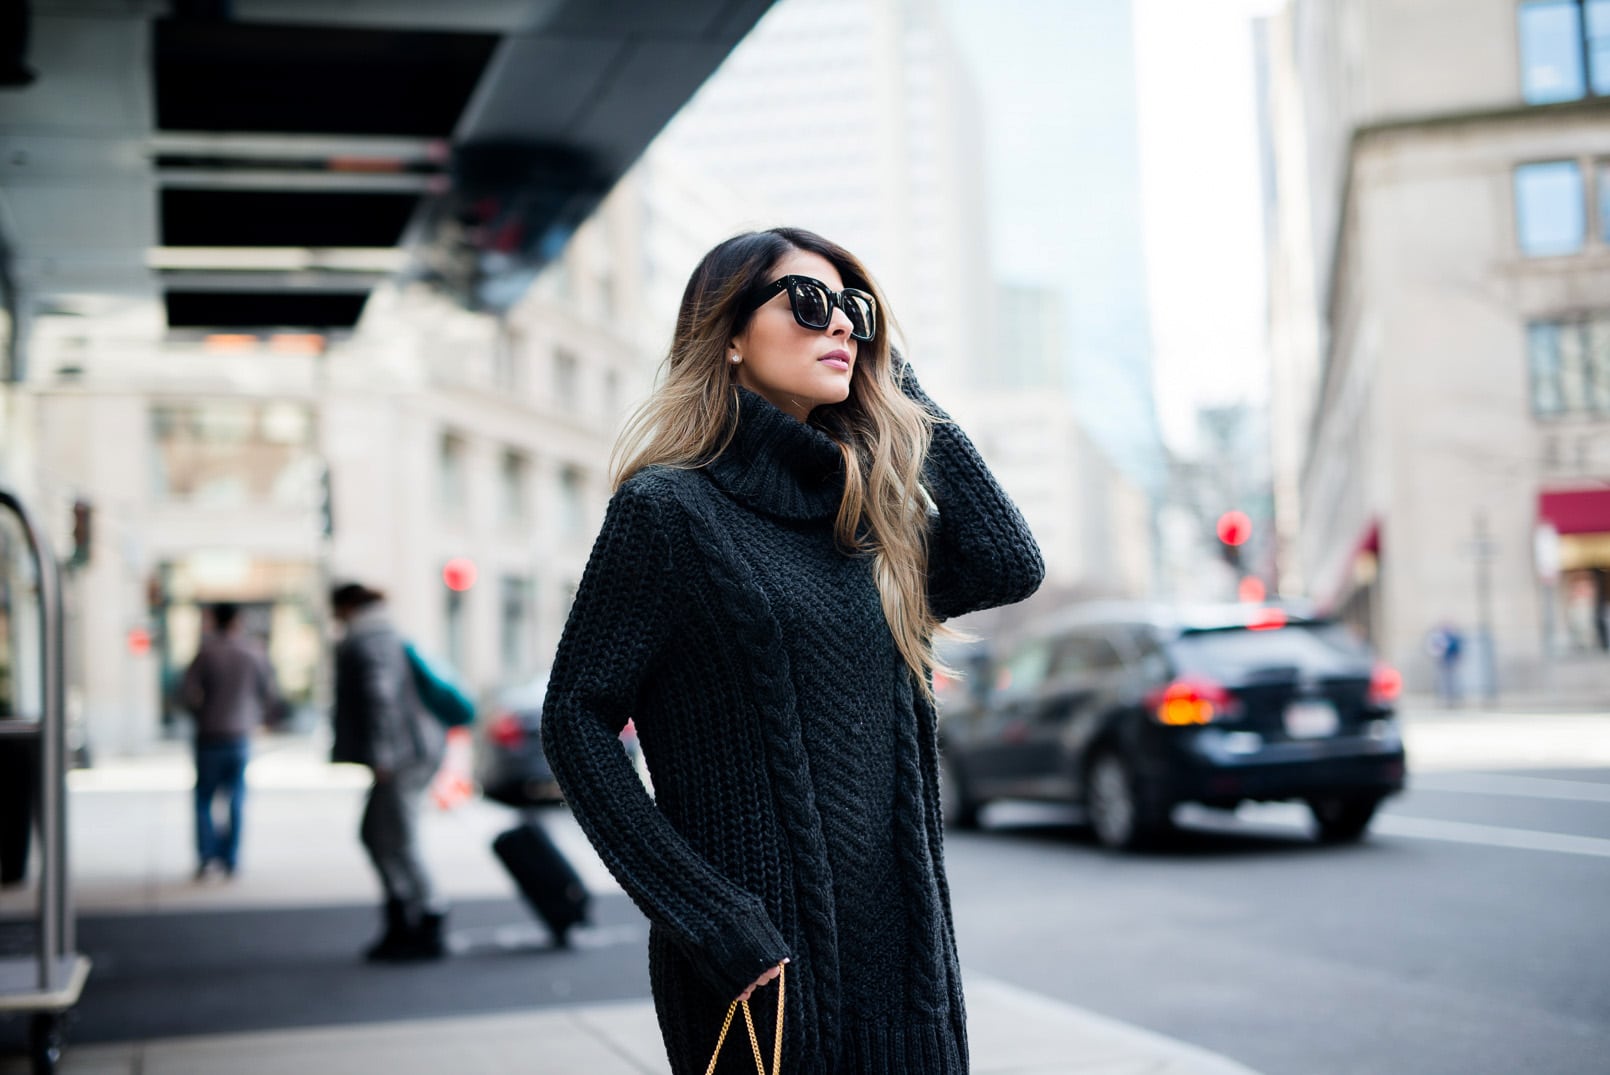 15 Sweater Dresses You Need Now - The Girl from Panama